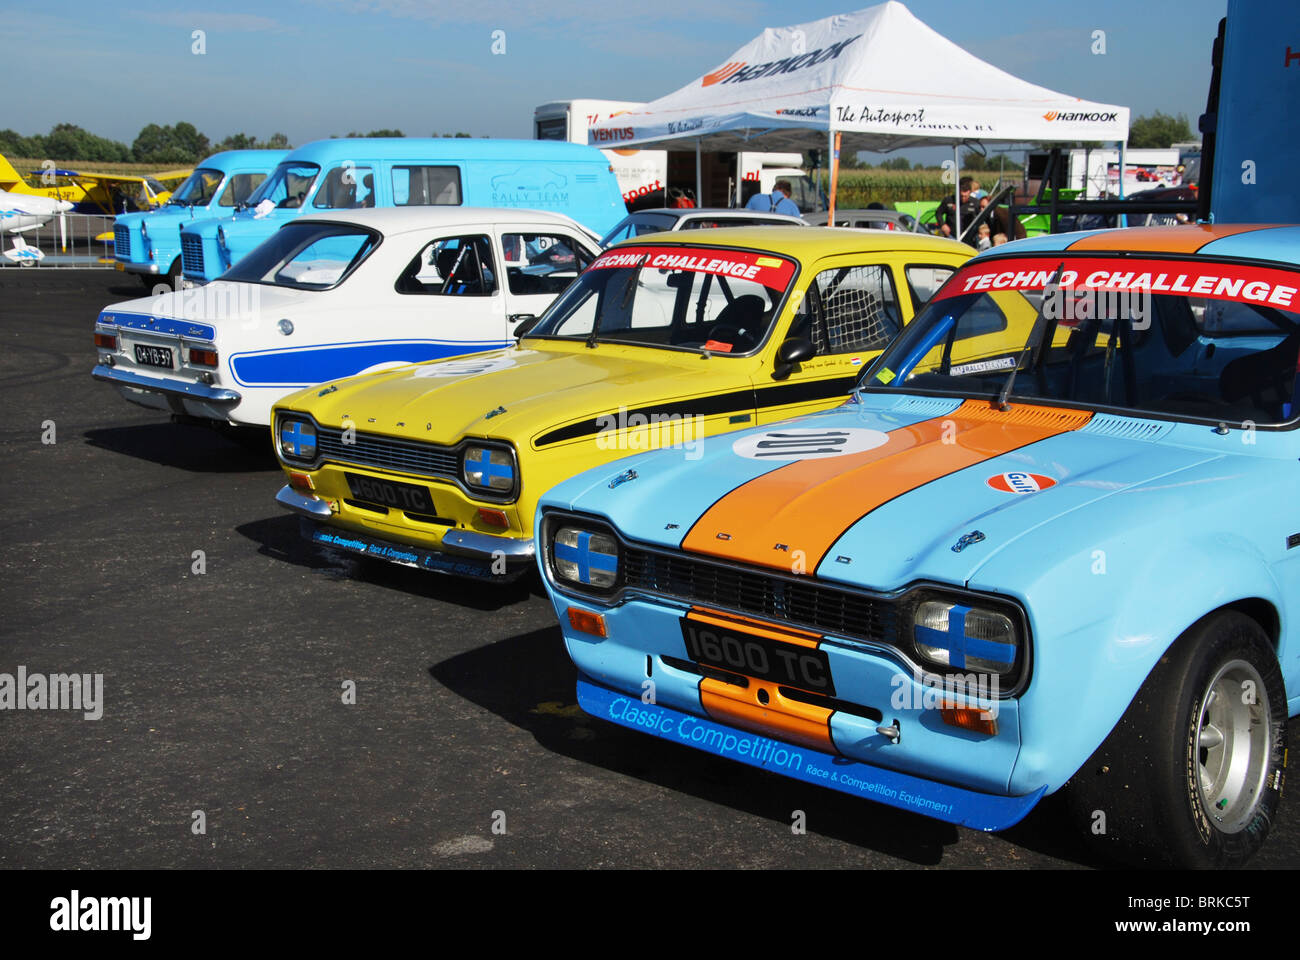 Ford Escort Mk1 competition cars on display Stock Photo - Alamy